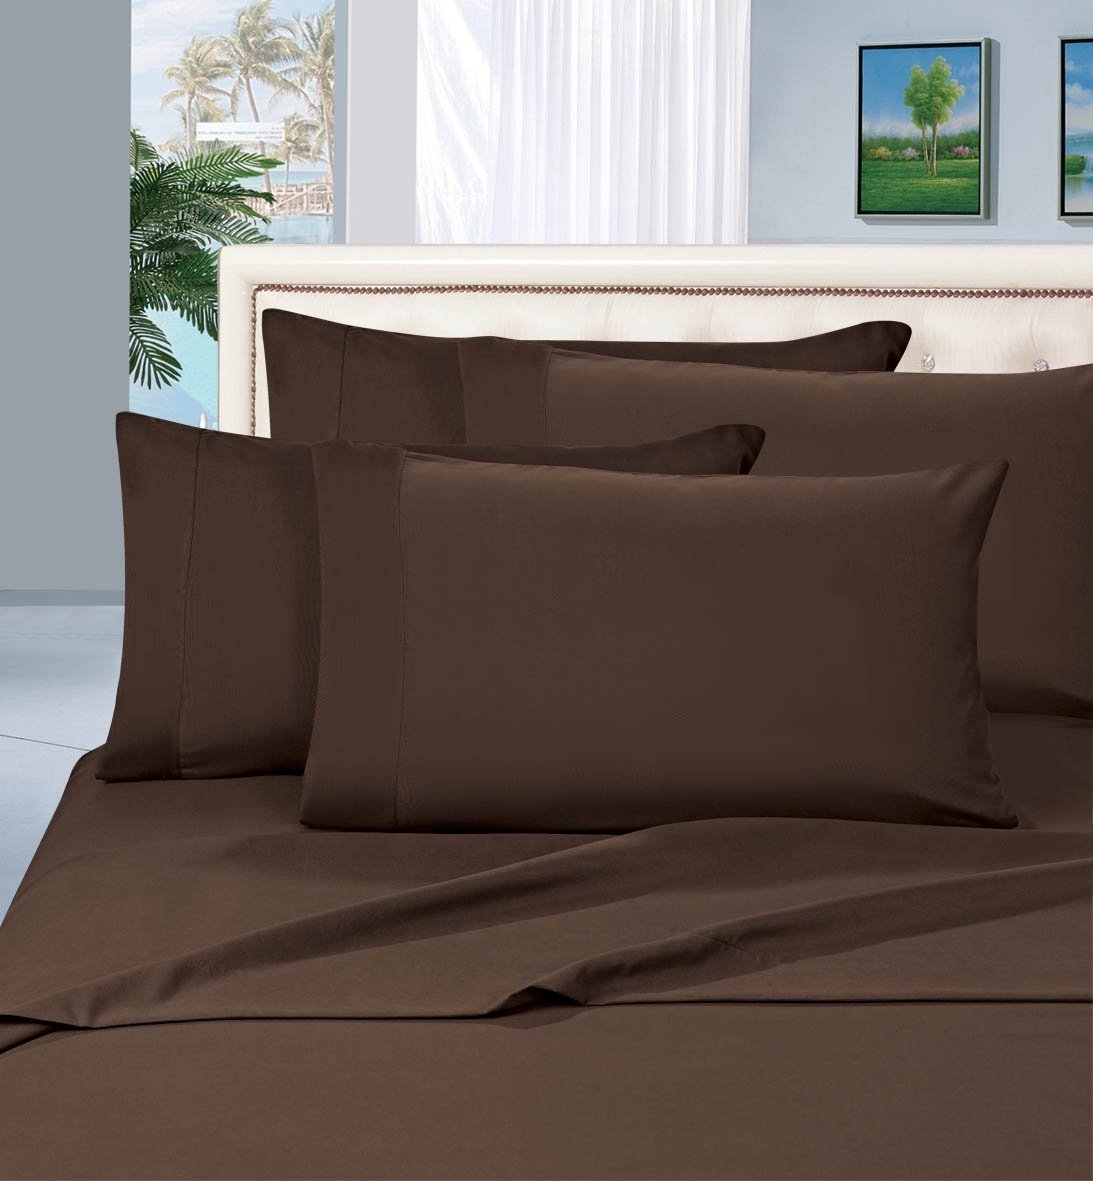 Elegant Comfort 1500 Series Wrinkle Resistant Egyptian Quality Hypoallergenic Ultra Soft Luxury 4-piece Bed Sheet Set, King, Chocolate Brown